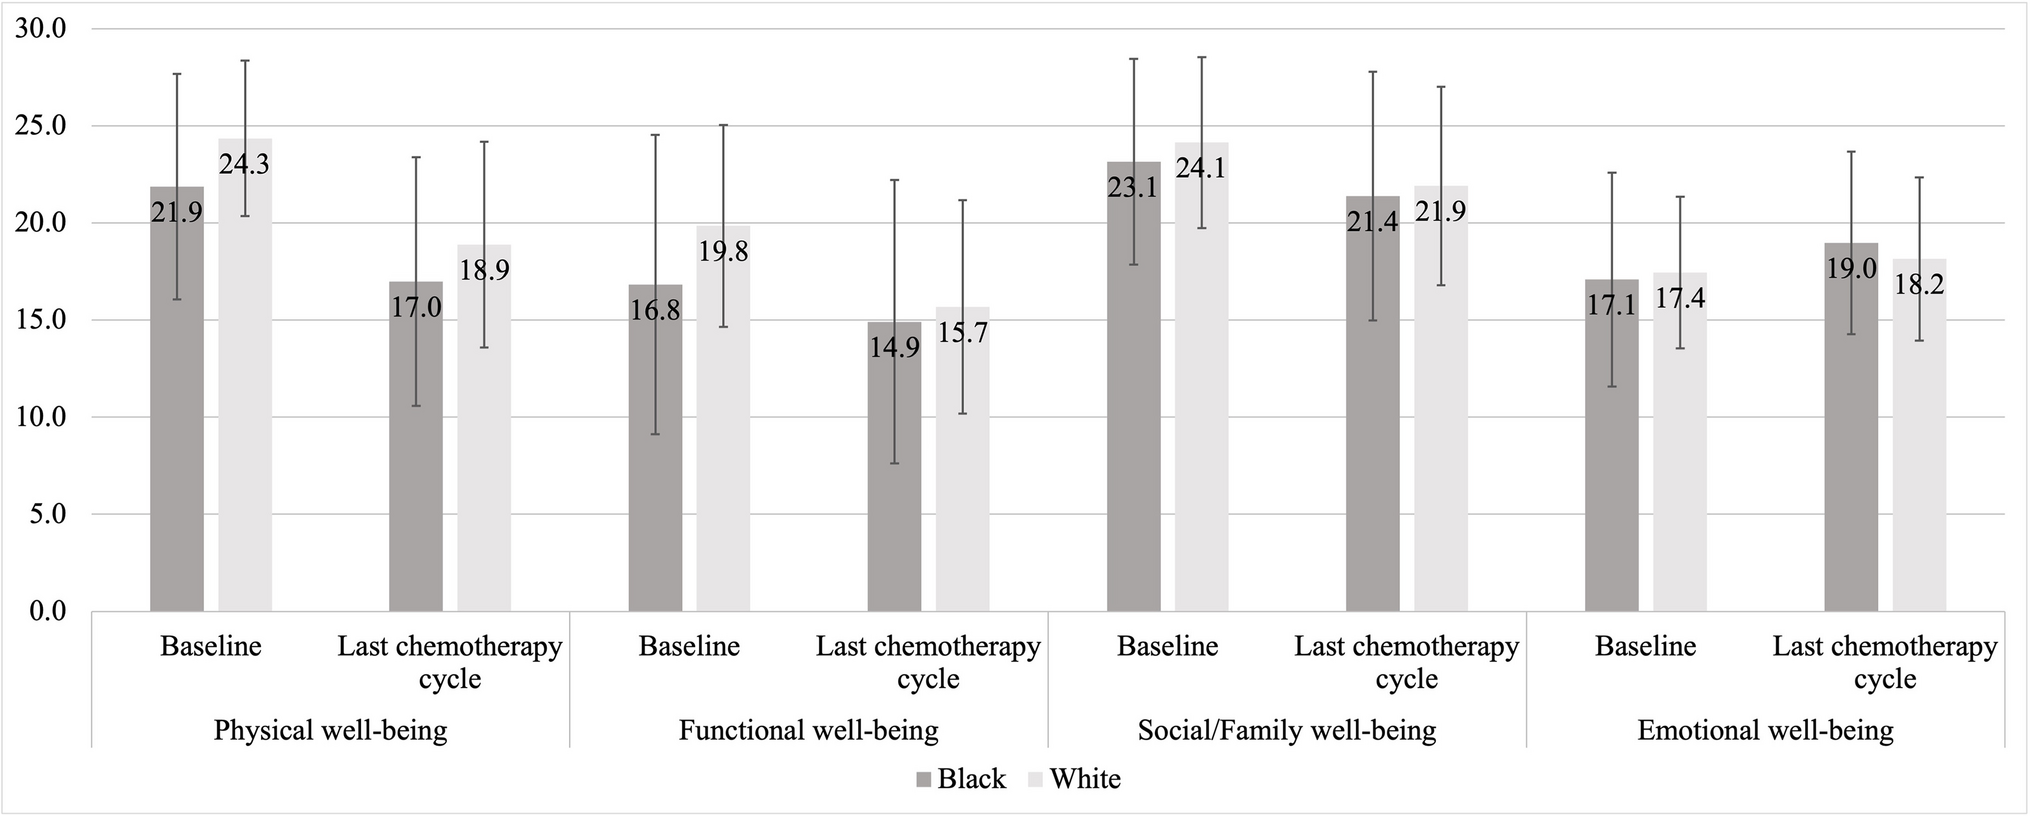 Health-related quality of life over chemotherapy course among individuals with early-stage breast cancer: the association of social determinants of health and neighborhood socioeconomic disadvantage